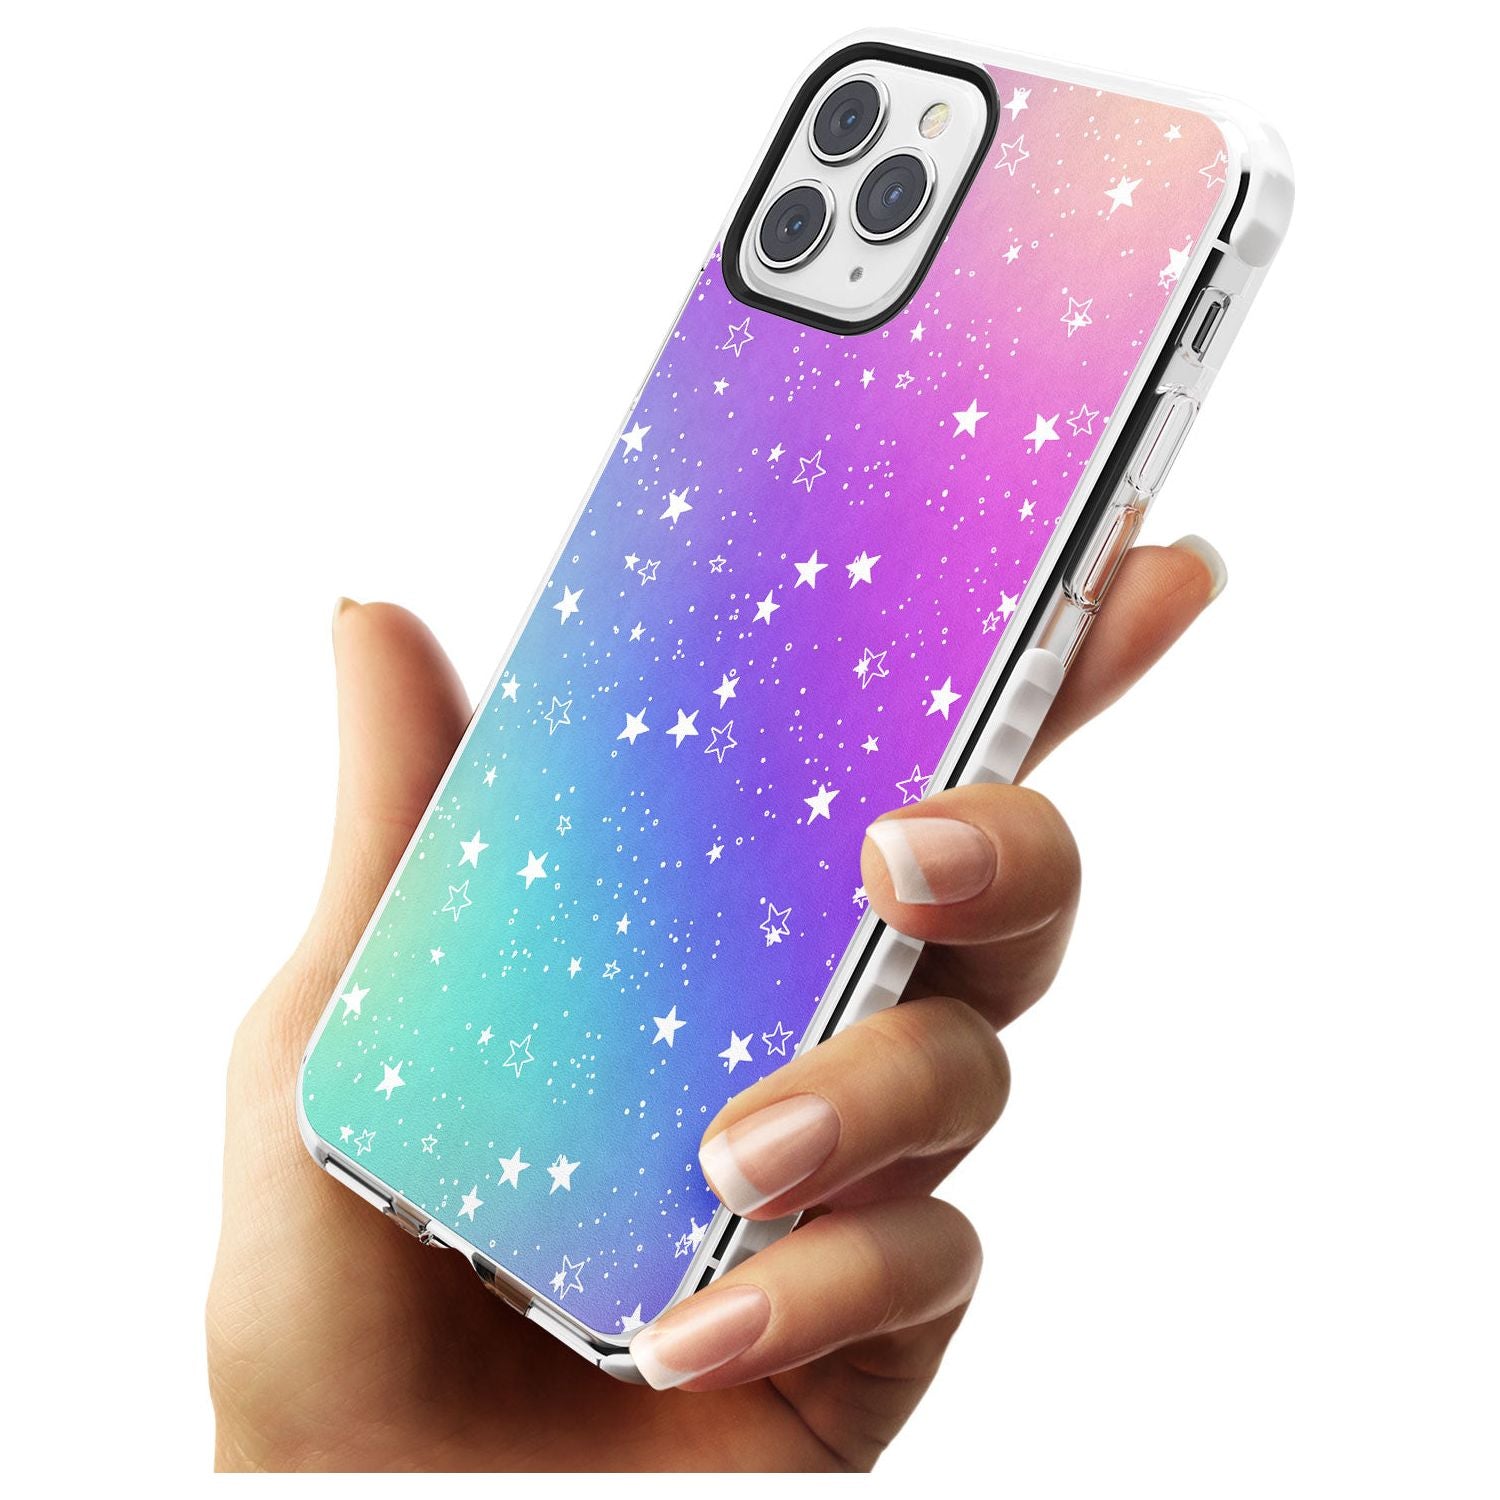 White Stars on Pastels Slim TPU Phone Case for iPhone 11 Pro Max